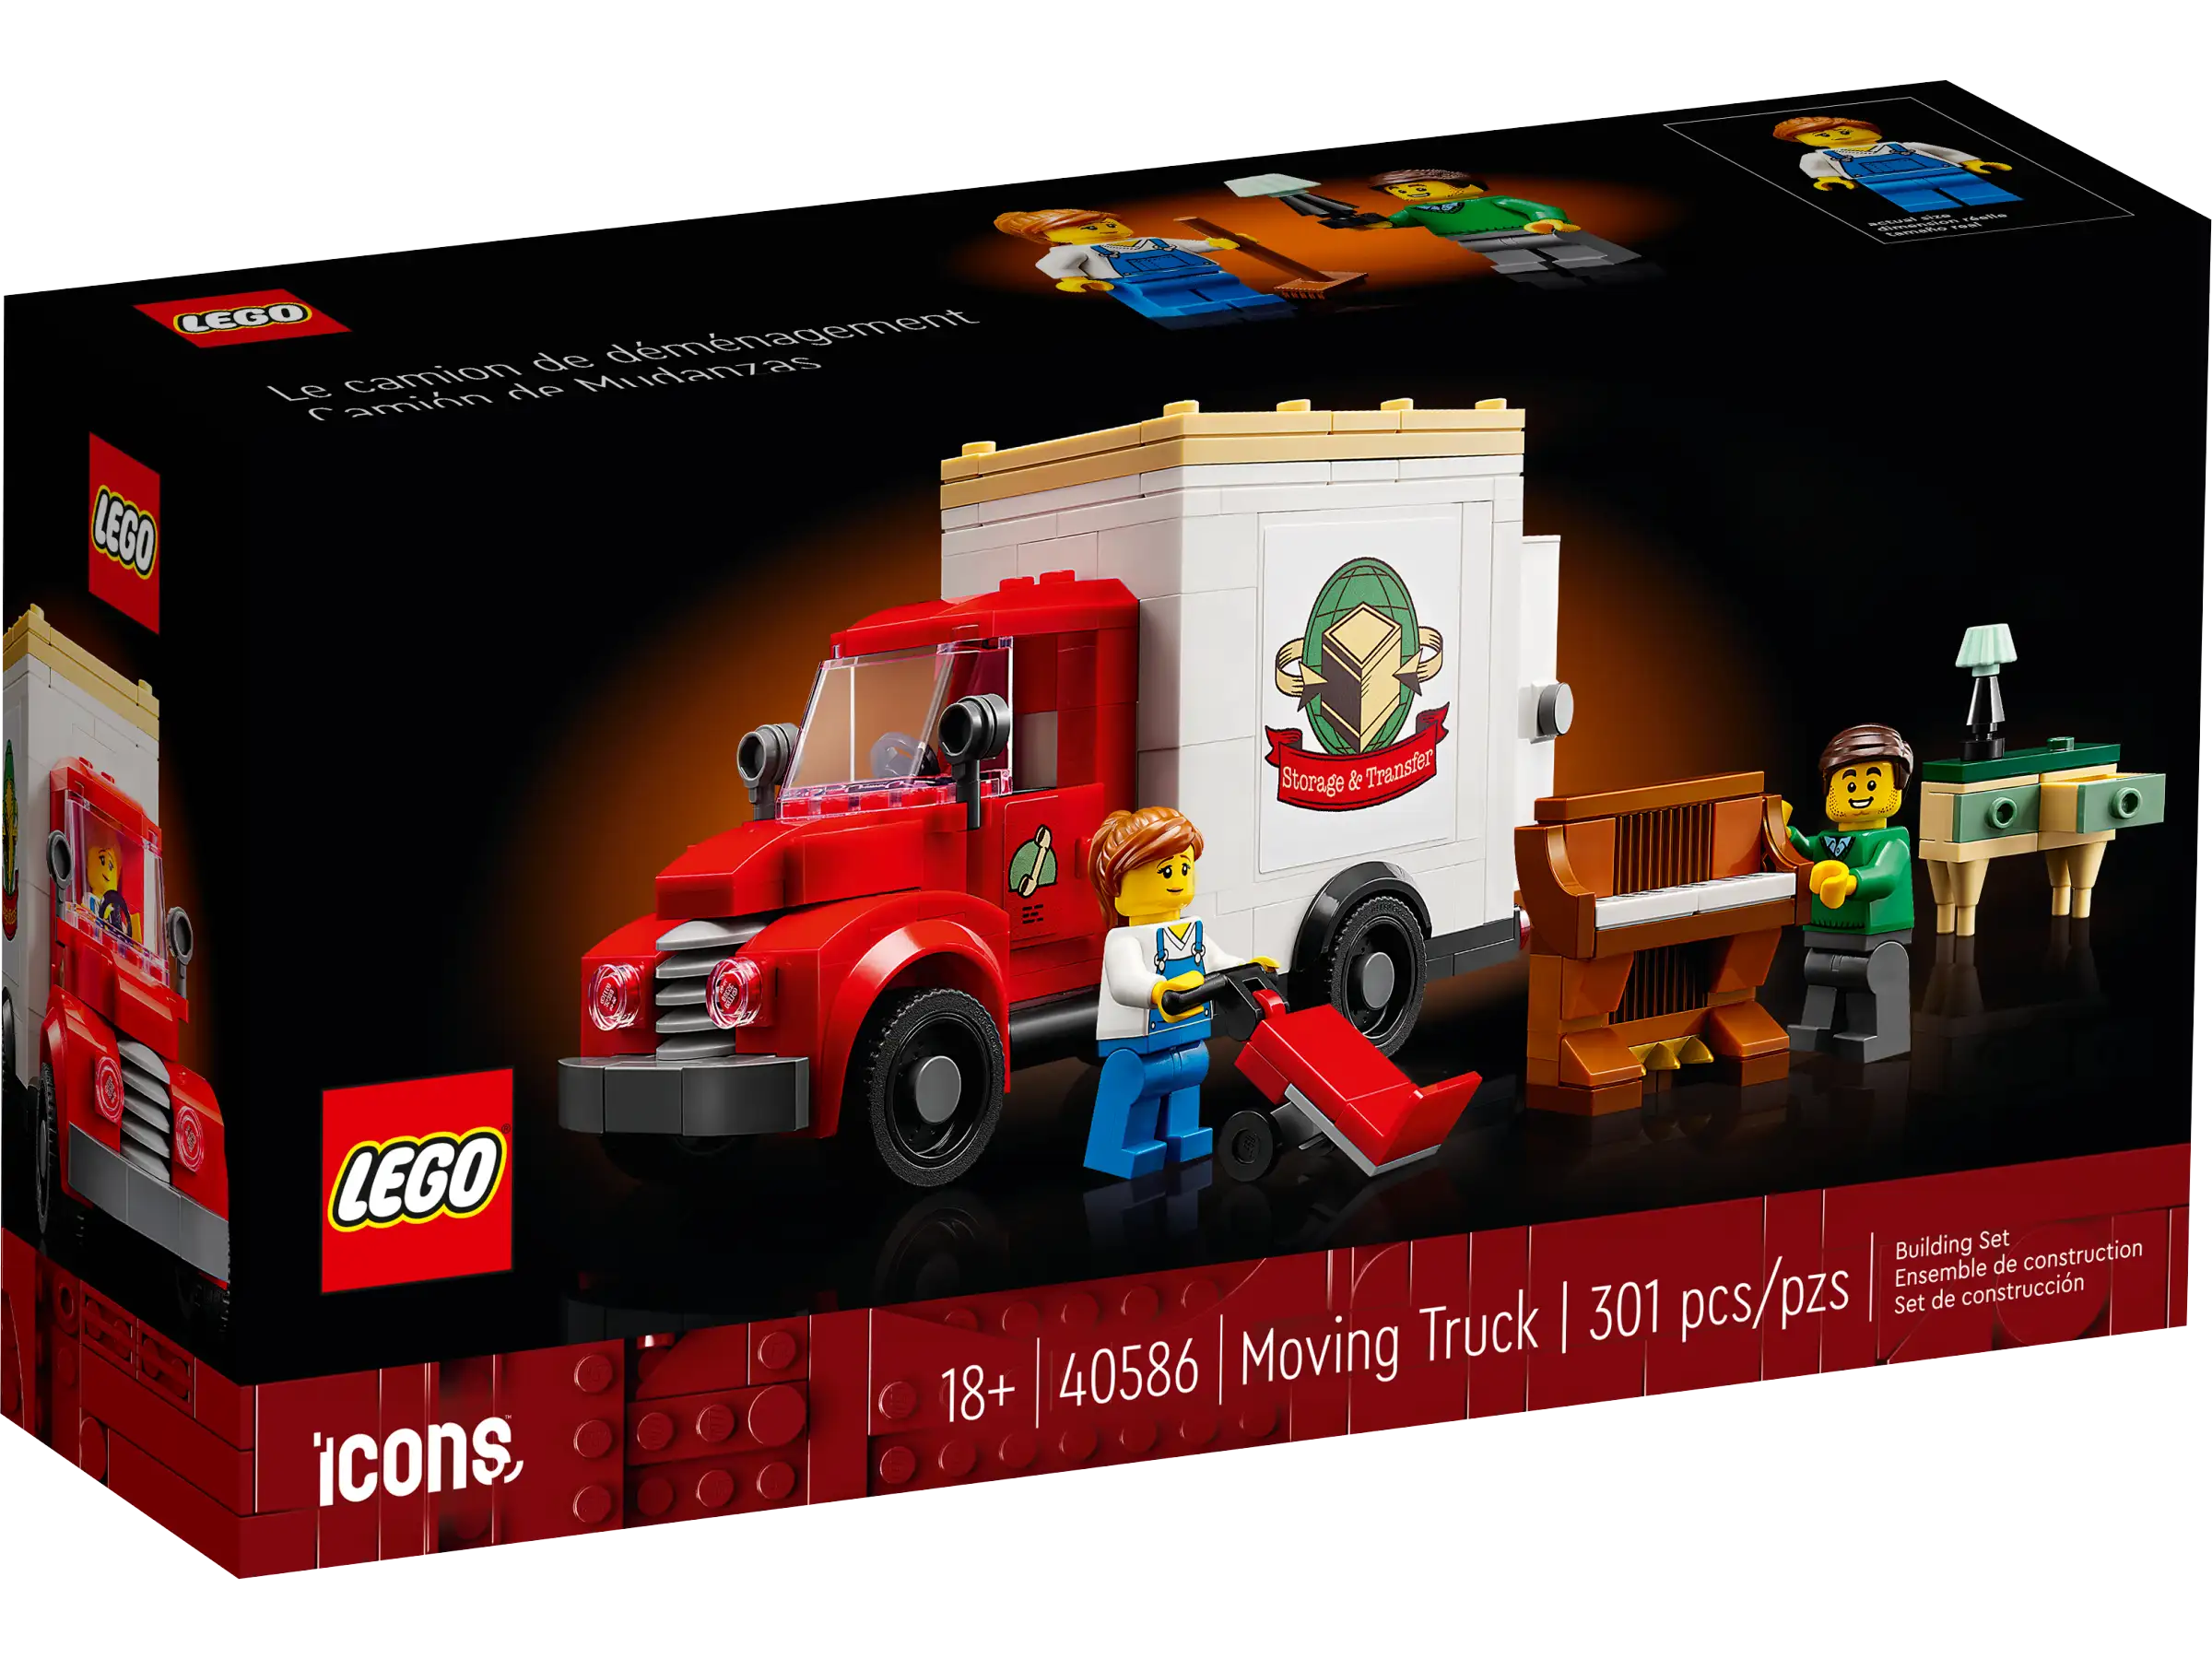 Moving Truck (40586)